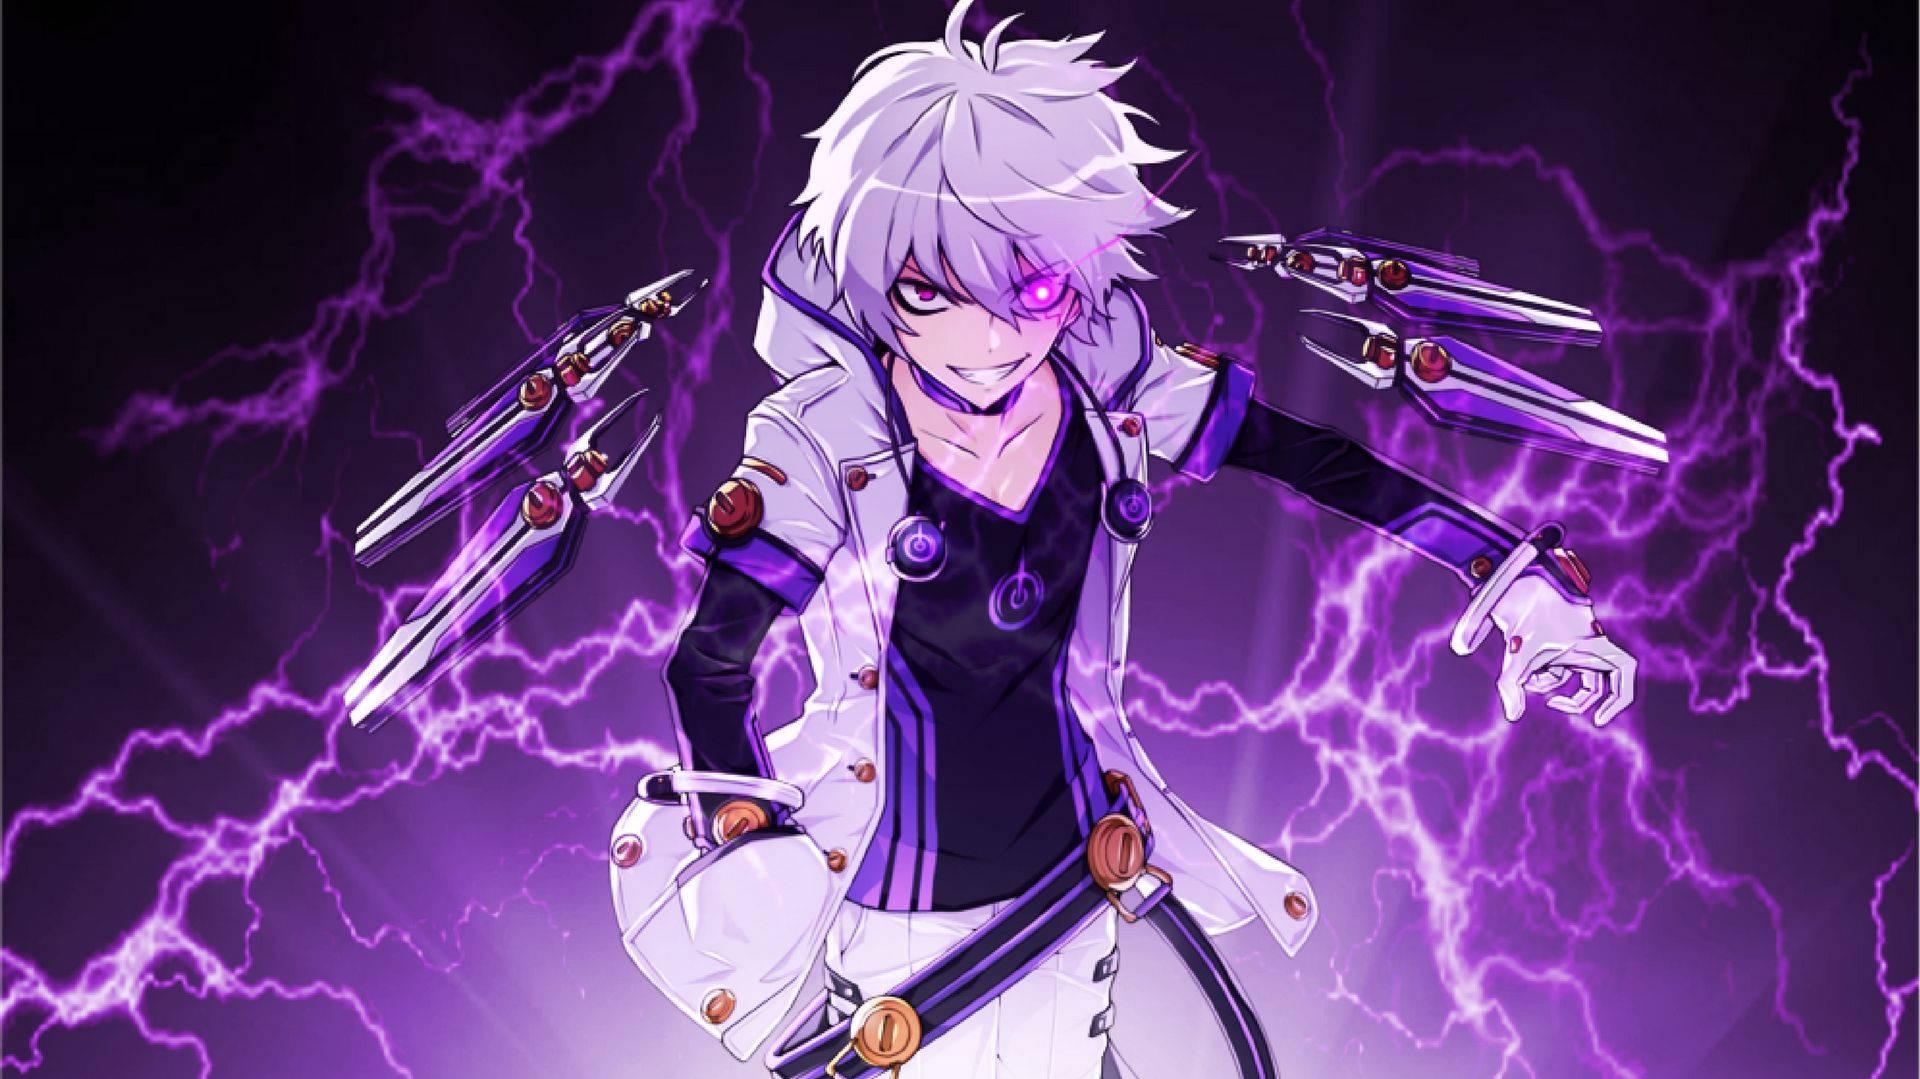 Download Anime Boy Gaming With An Elsword Character Wallpaper